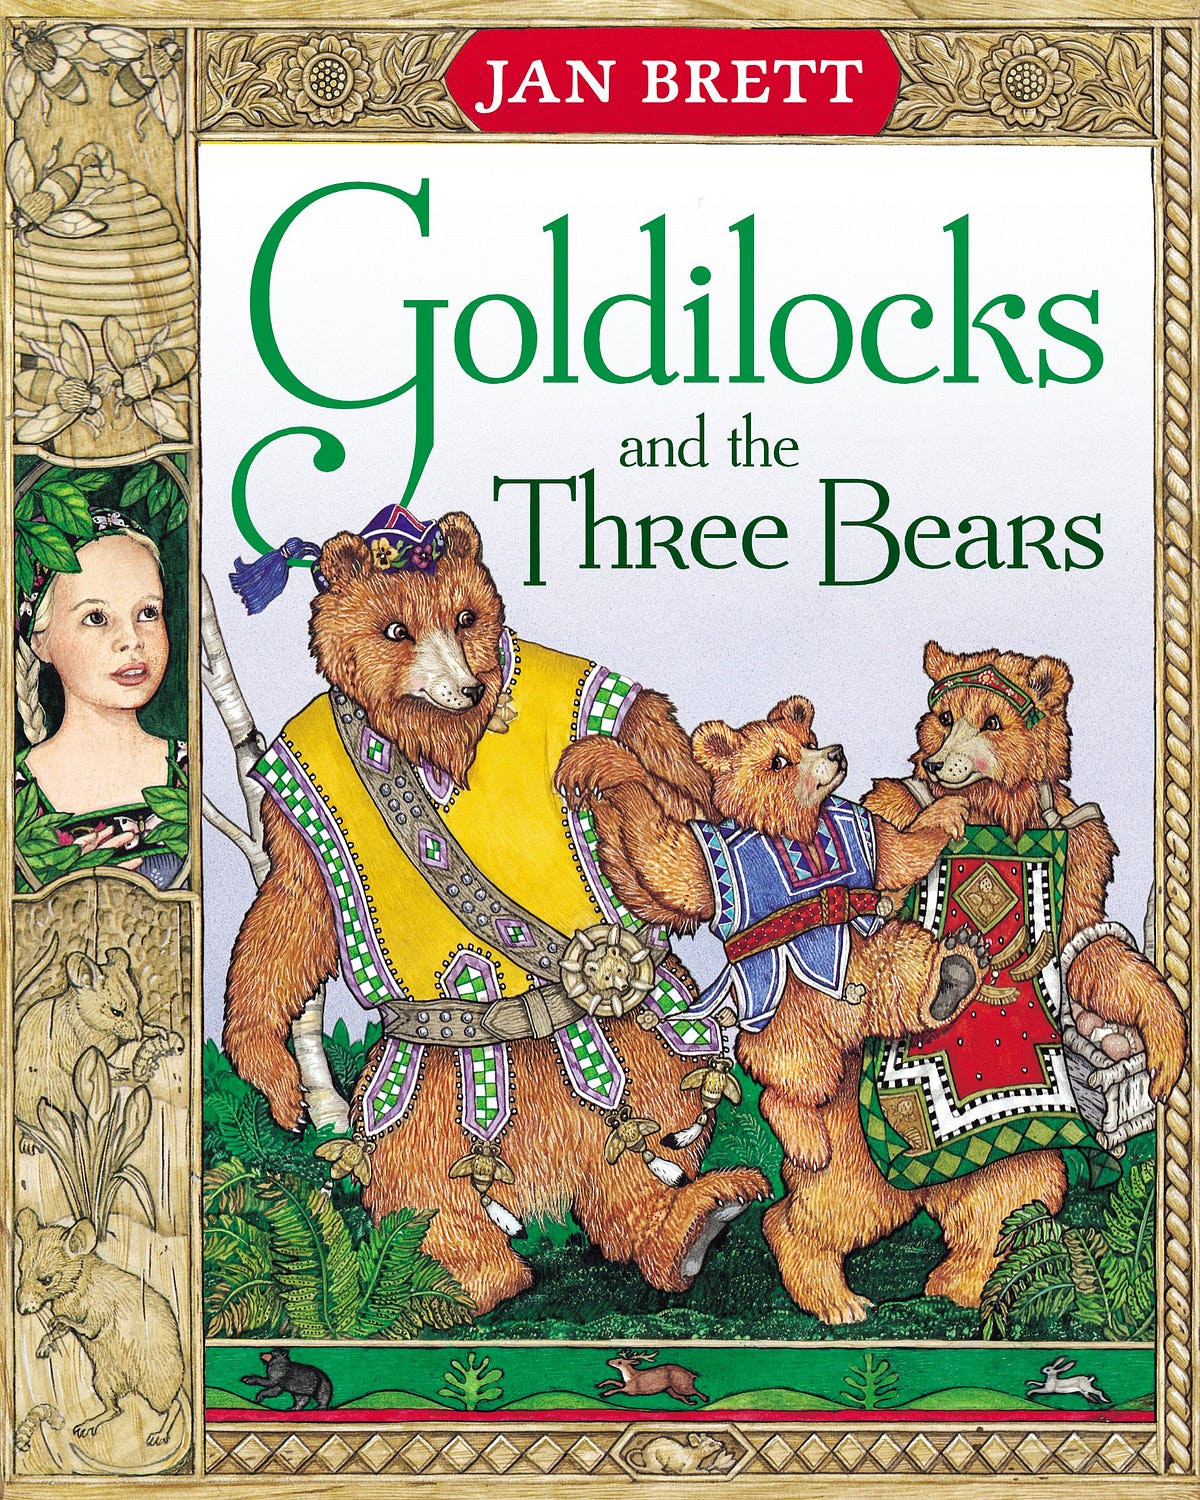 Goldilocks and the Three Bears" Folklore Review.